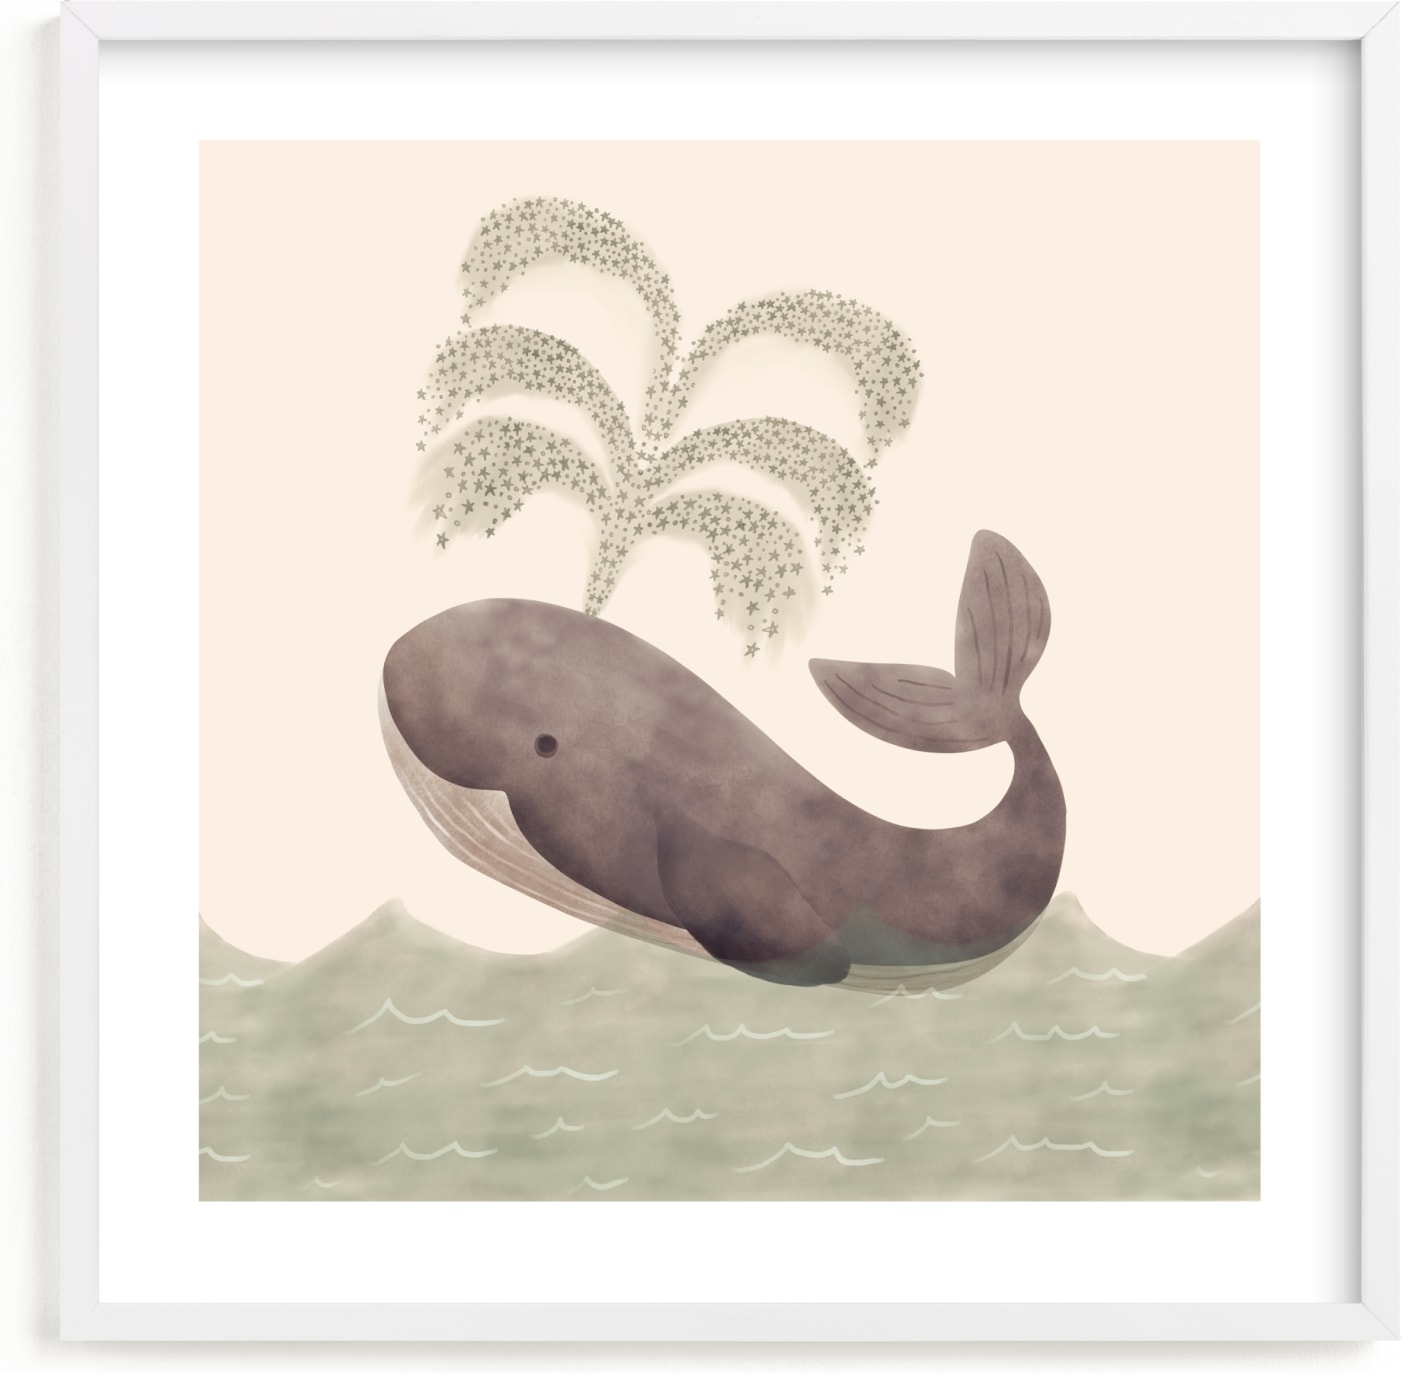 This is a brown art by Elly called Whale.